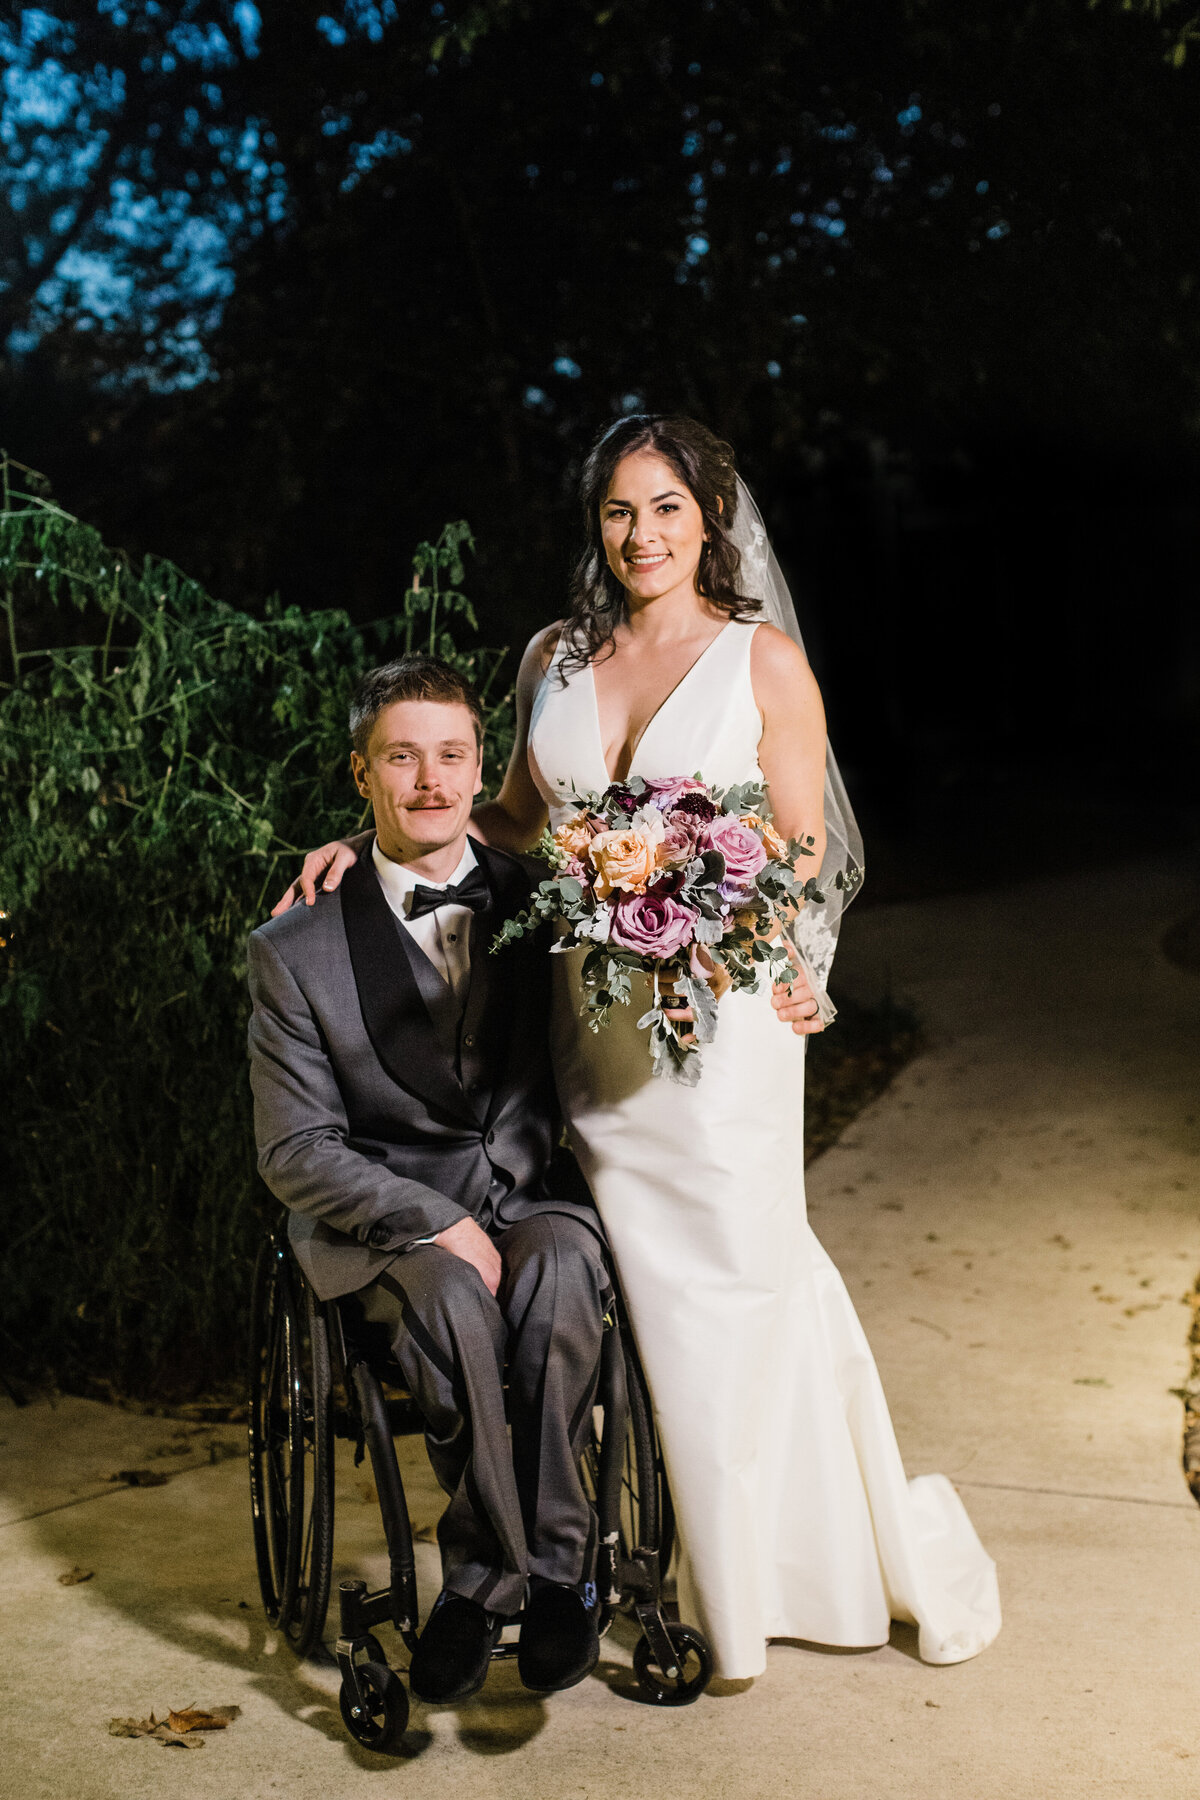 A nighttime portrait of a bride and groom after their wedding ceremony in DFW, Texas. The bride is on the right and is wearing a sleeveless, white dress with a veil and is holding a bouquet. The groom is on the right and sits in a wheelchair while wearing a grey suit and bowtie.